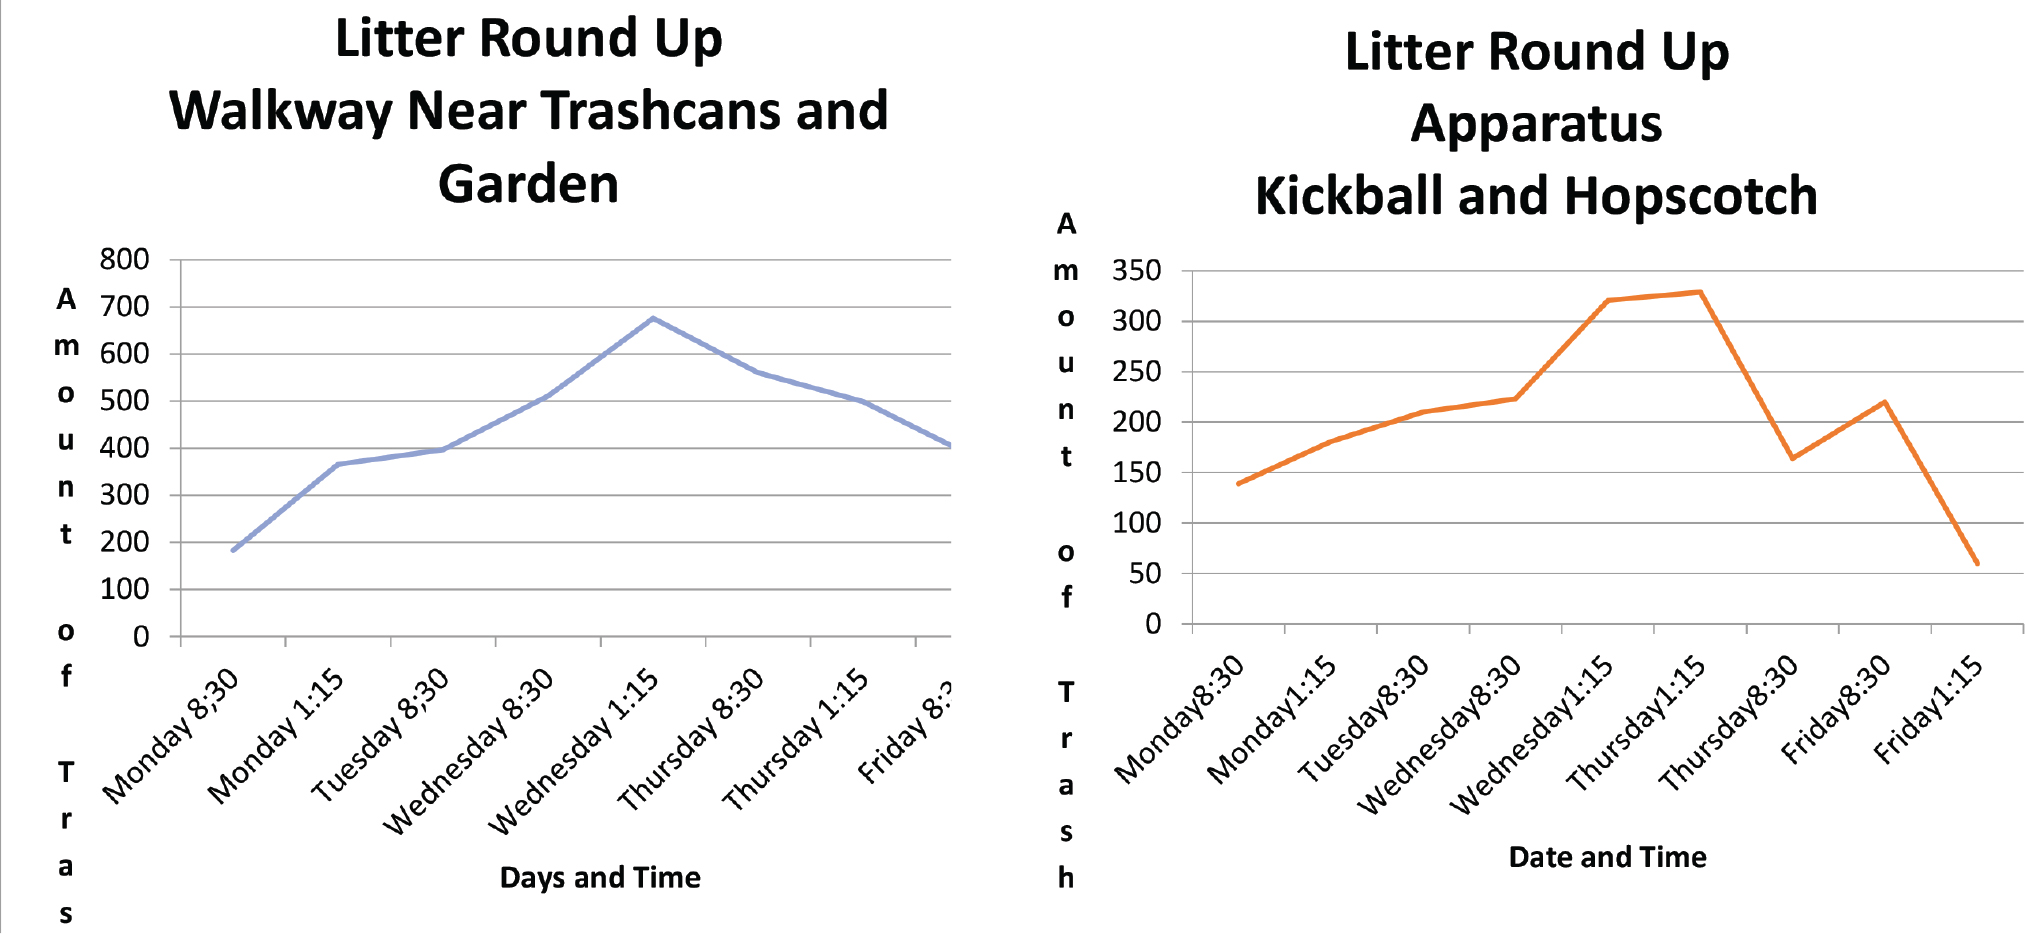 Graphs of student-generated data on campus litter collection.